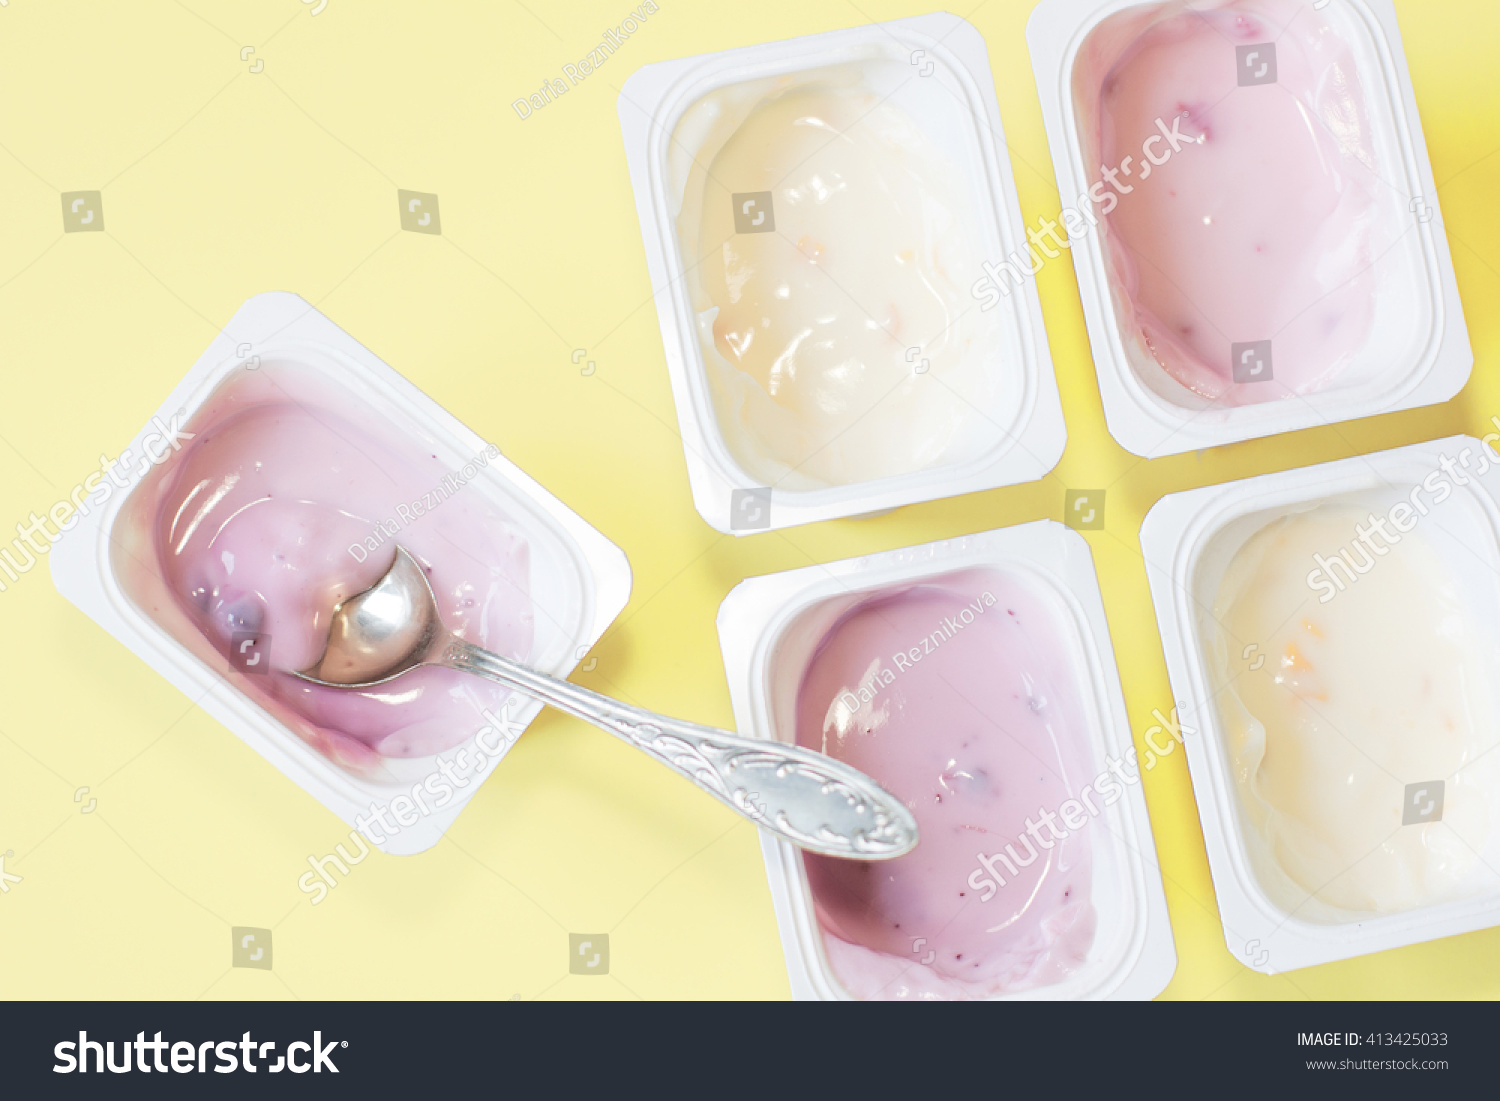 Yogurt Plastic Cups On Yellow Background Food And Drink Stock Image 413425033